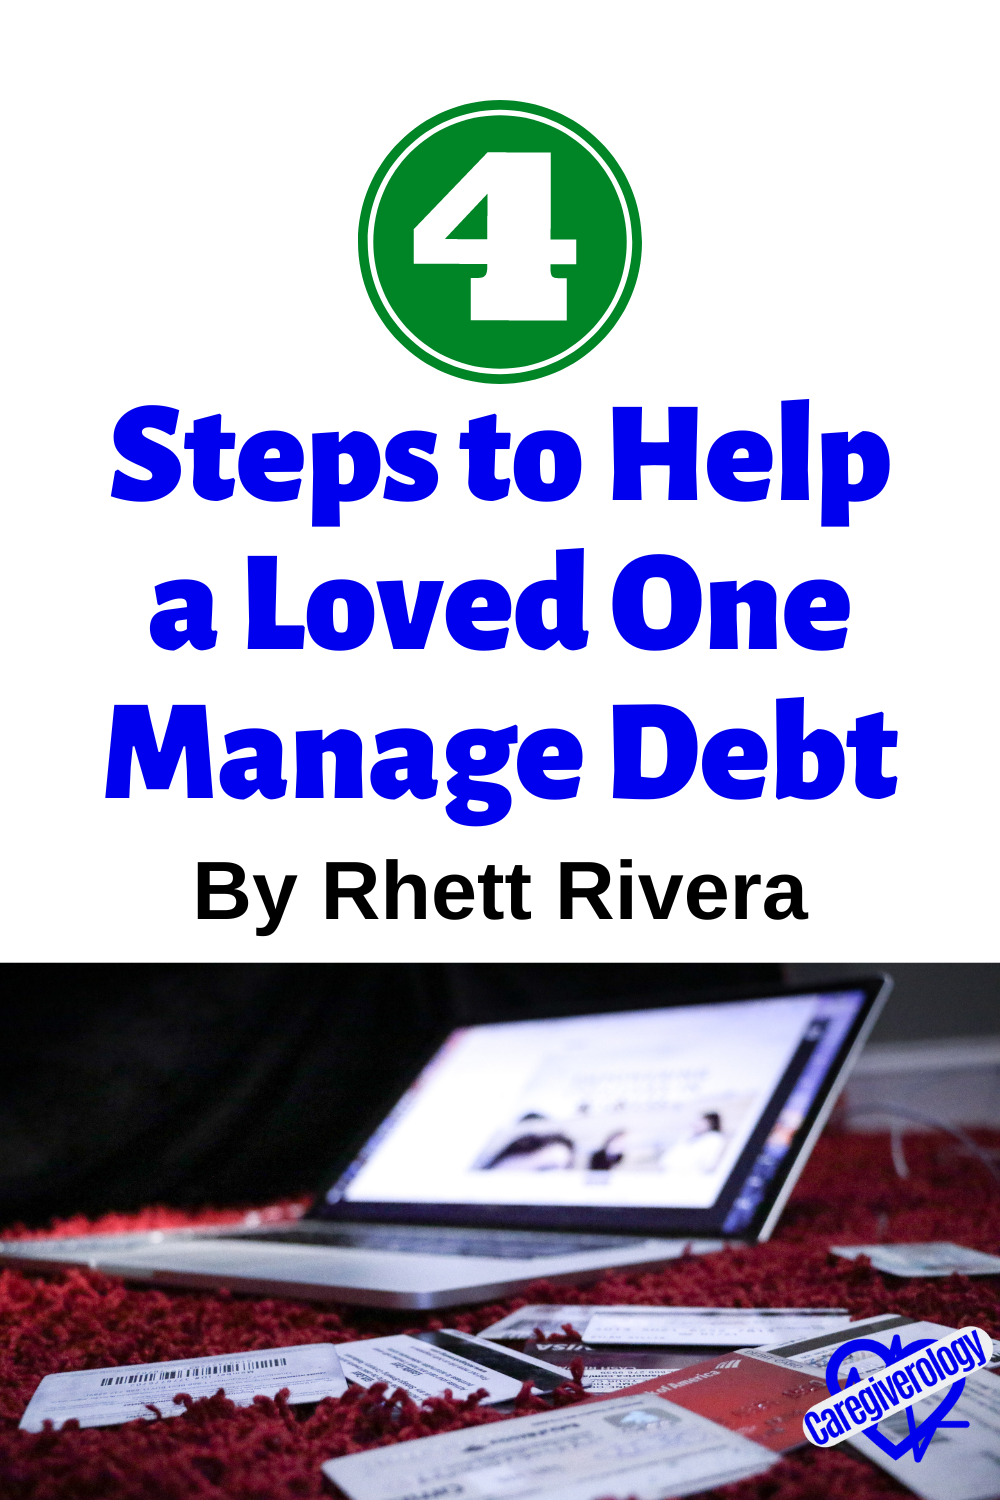 4 Steps to Help a Loved One Manage Debt